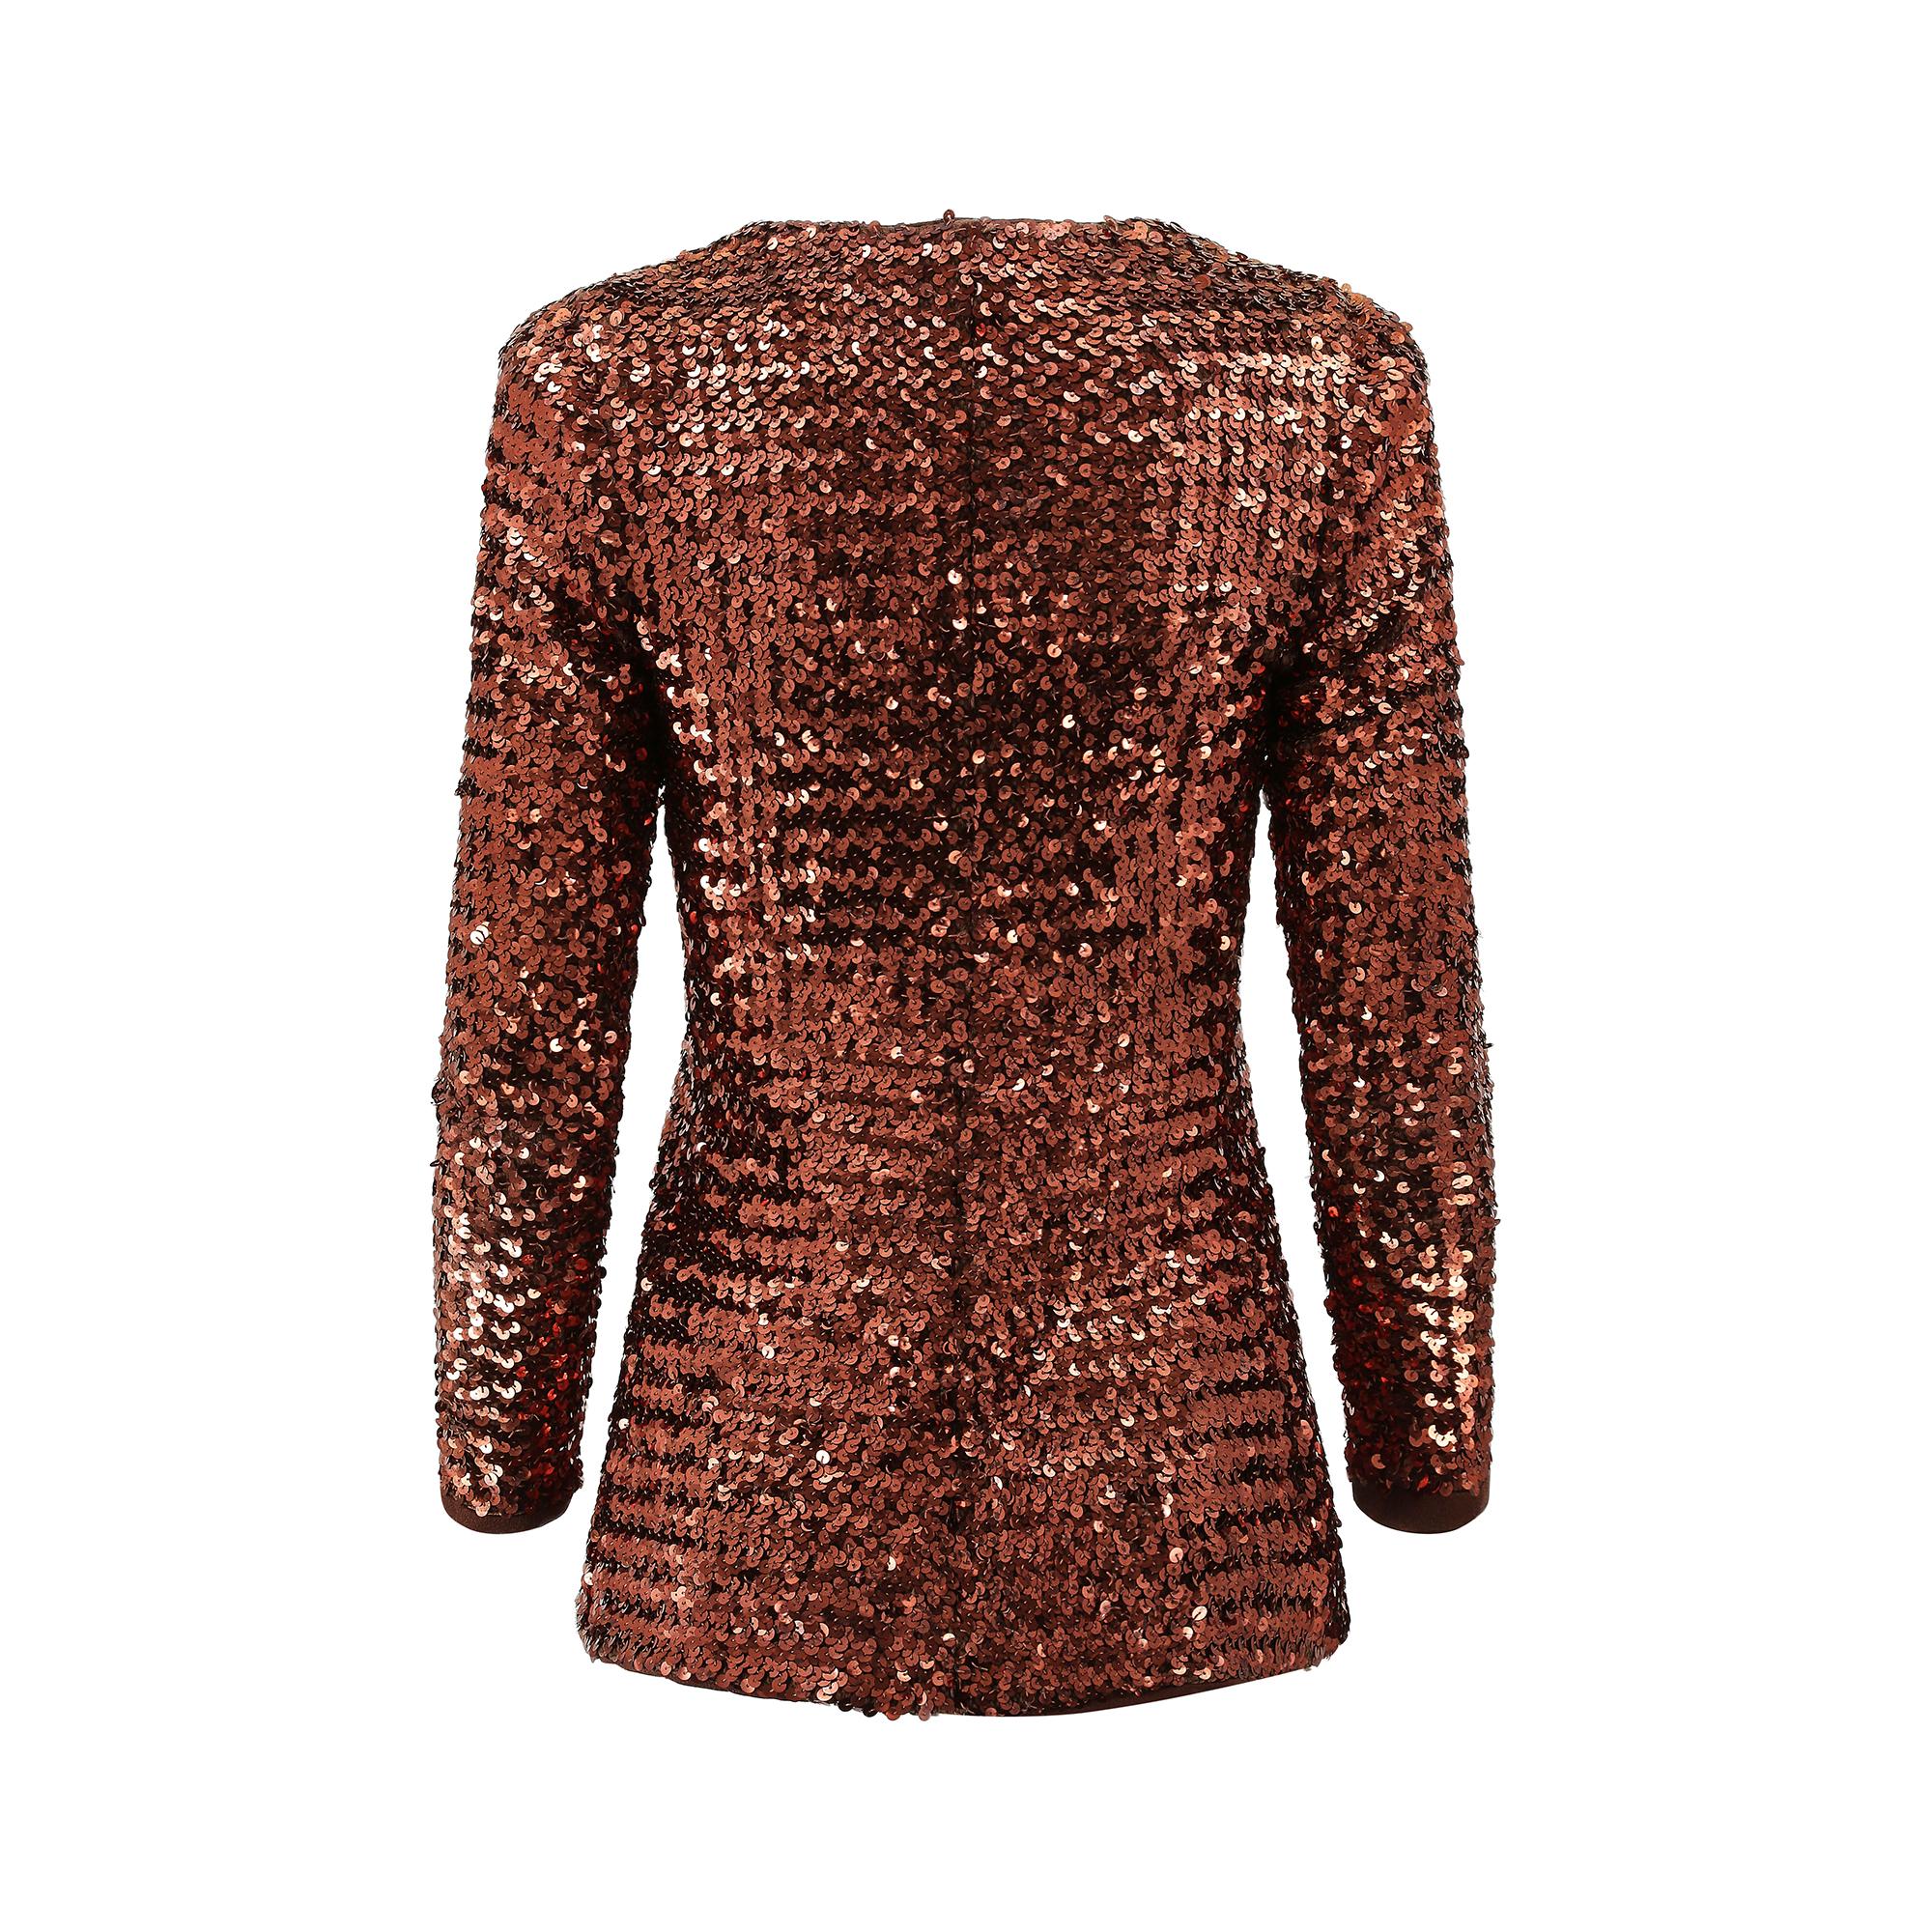 1970s Biba Copper Sequinned Jacket In Excellent Condition For Sale In London, GB